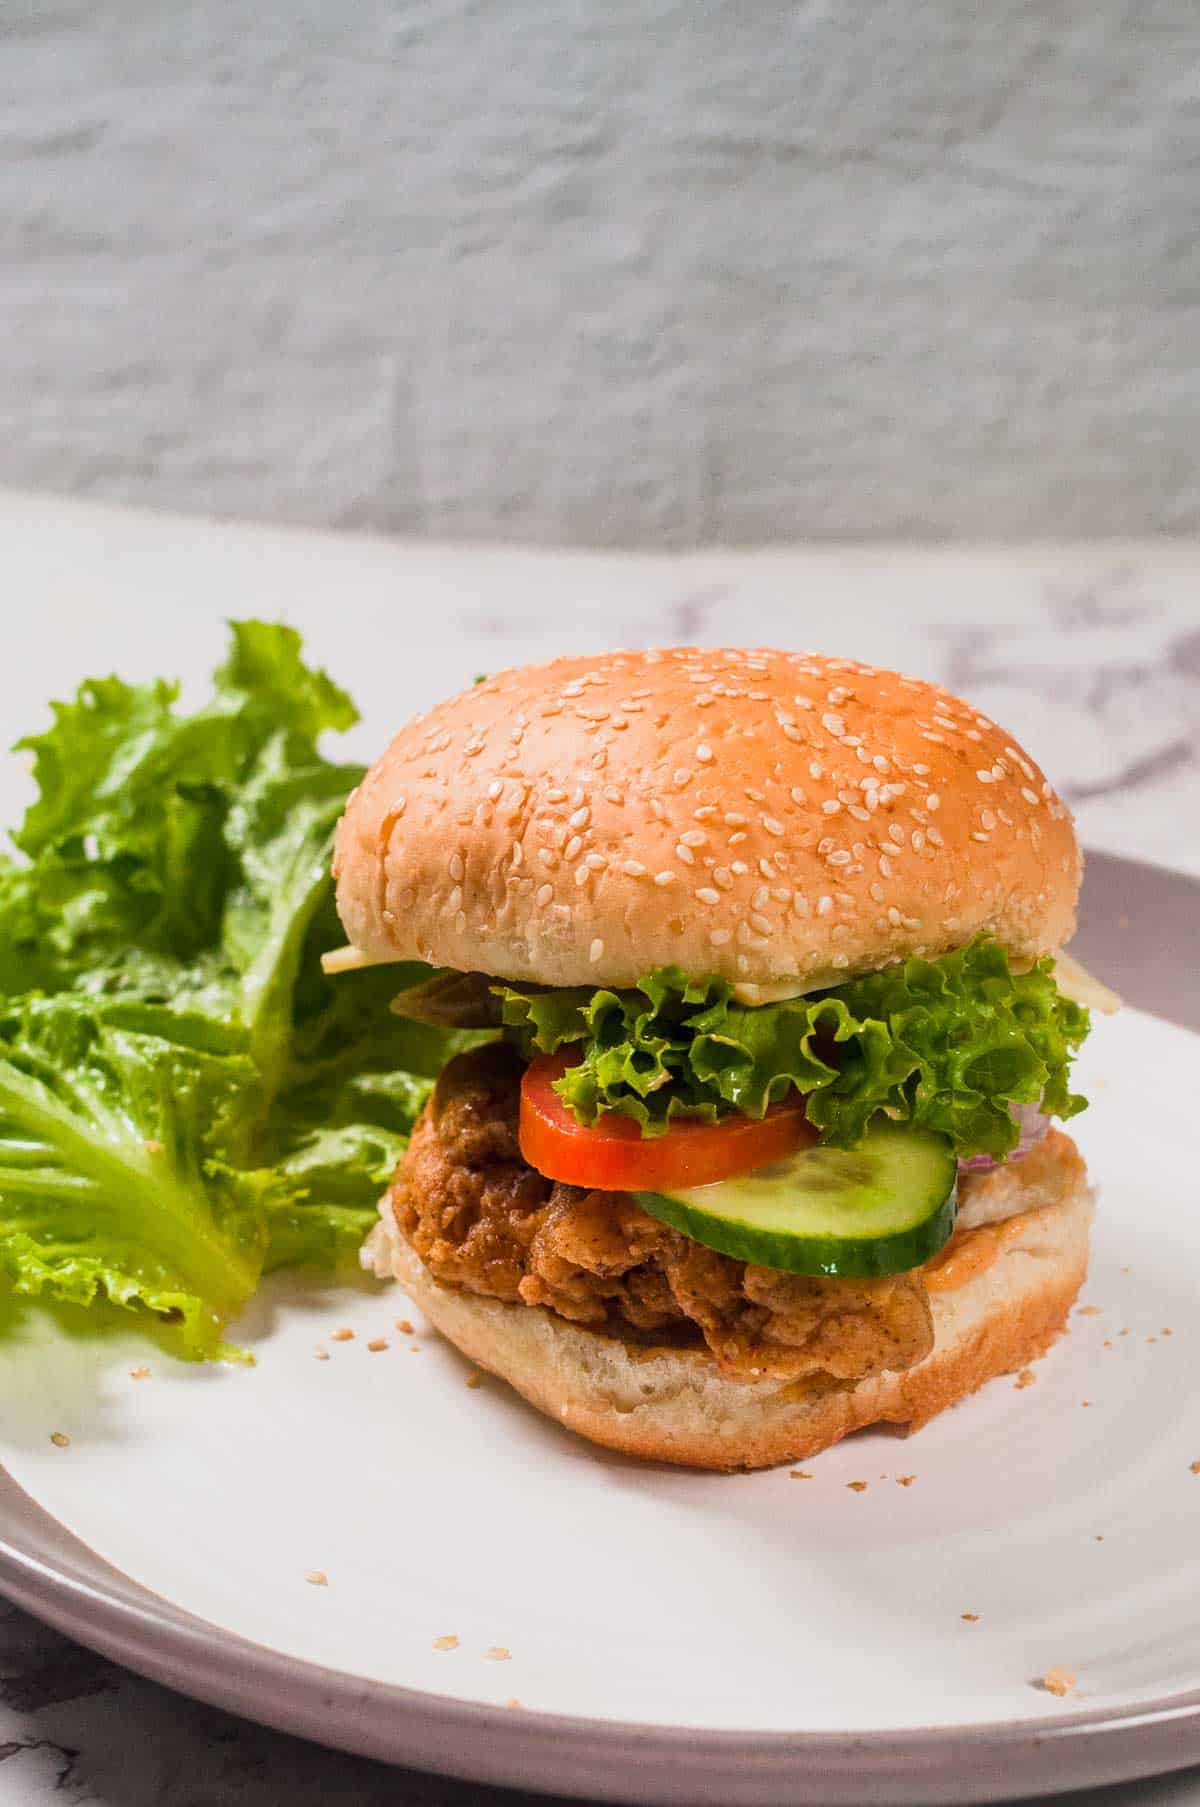 Spicy chicken sandwich served in a plate with fresh lettuce leaves.